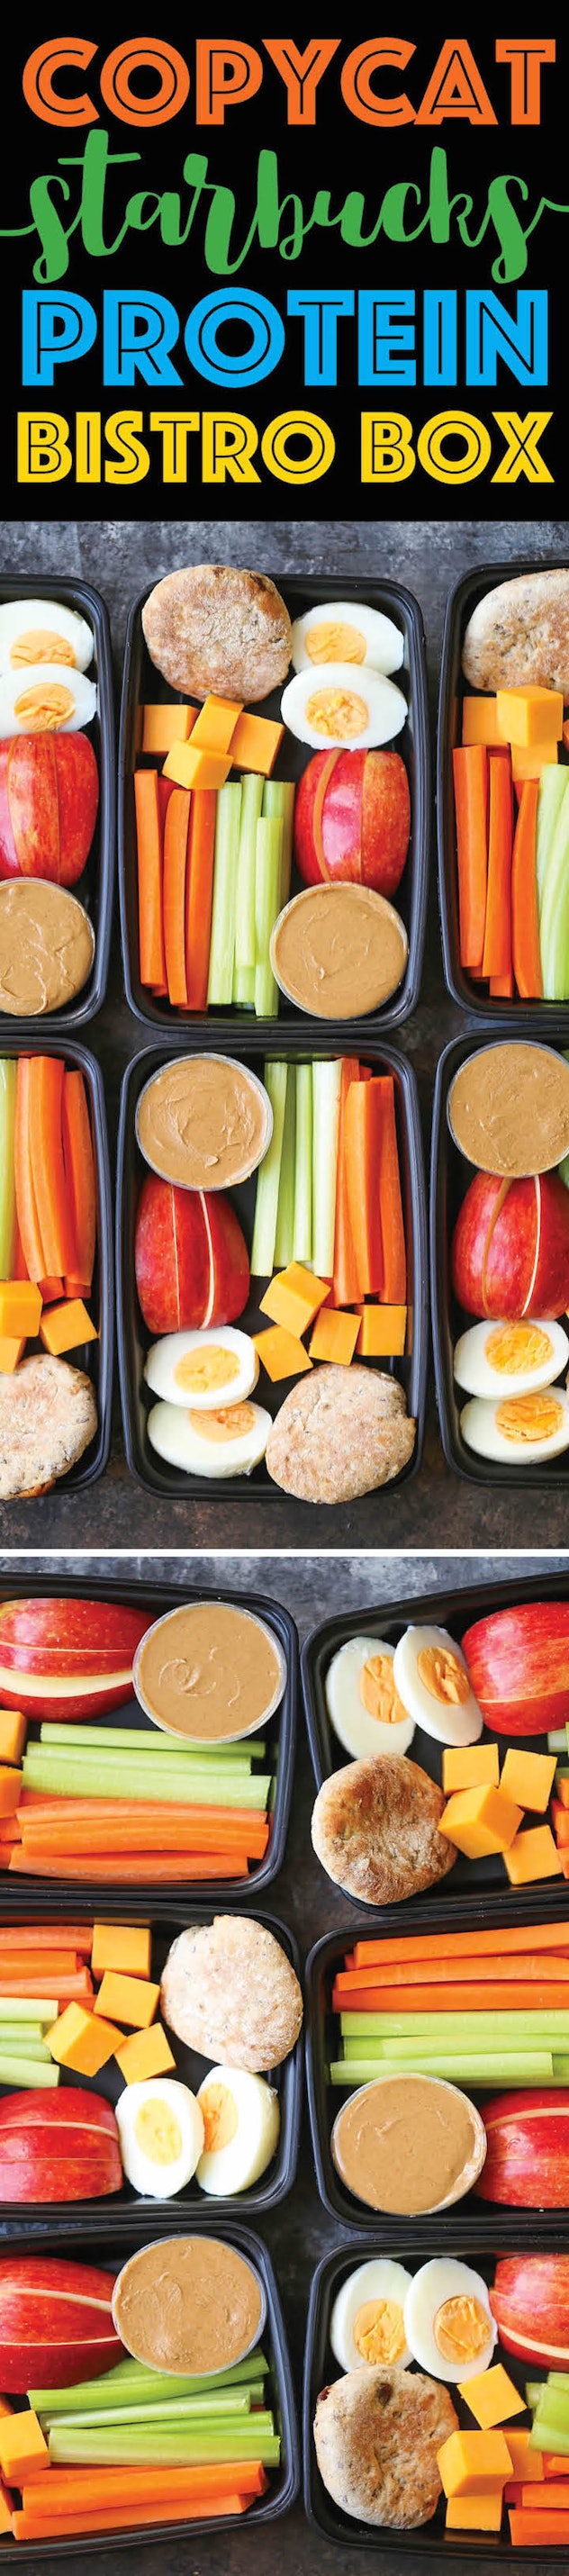 Toddler lunch plate idea 💡 I feel like at-home lunches can be